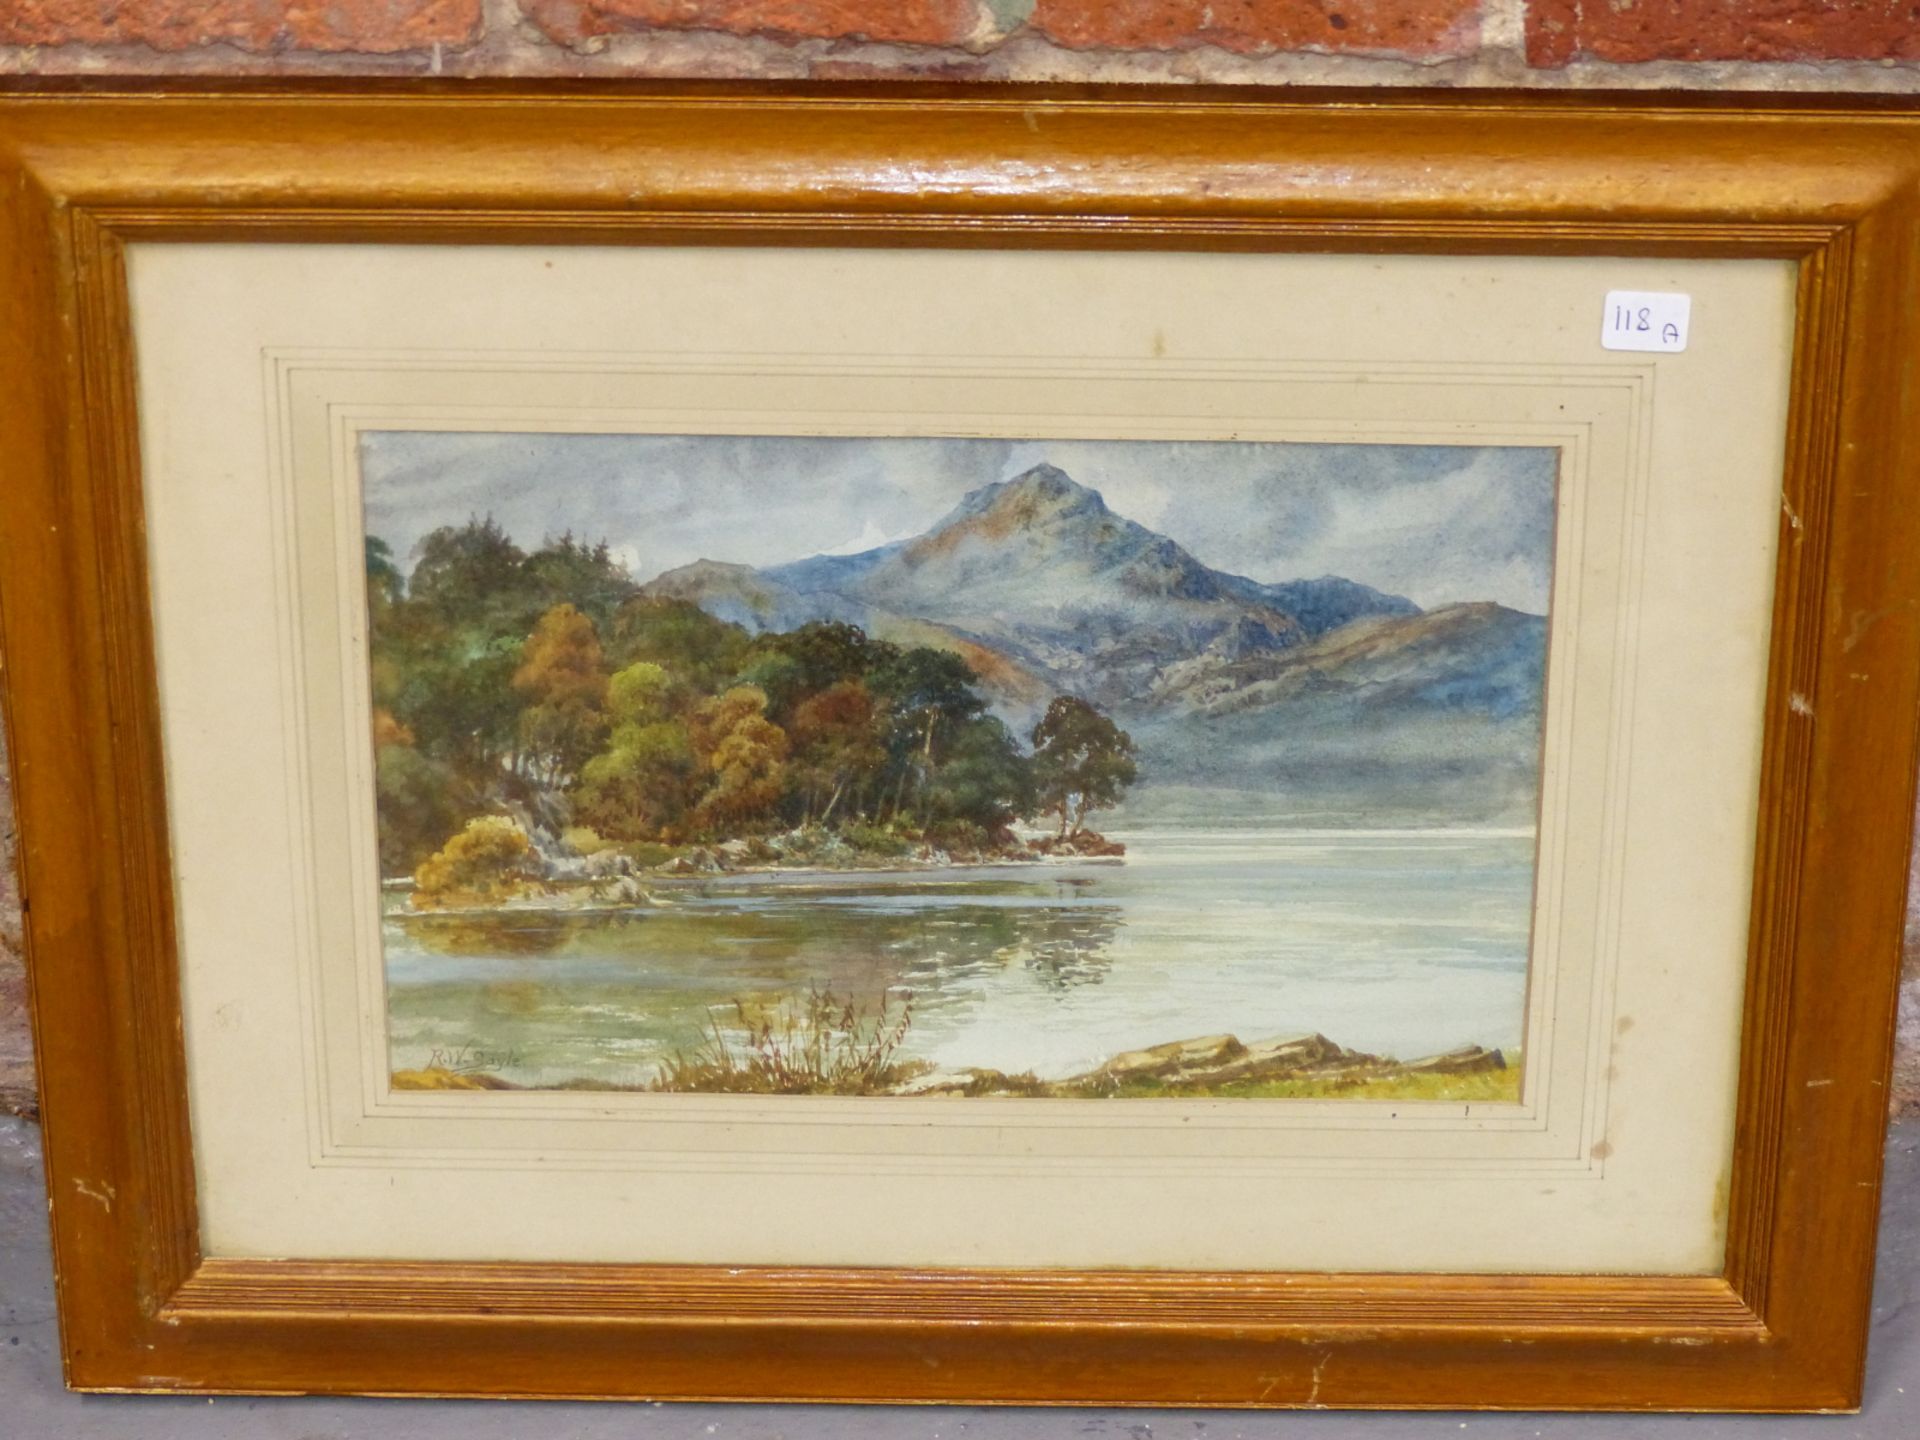 R.W. SAYLE ( 19TH CENTURY) AN ESTUARY VIEW WITH DISTANT MOUNTAIN, WATERCOLOUR SIGNED L/L. - Image 3 of 4